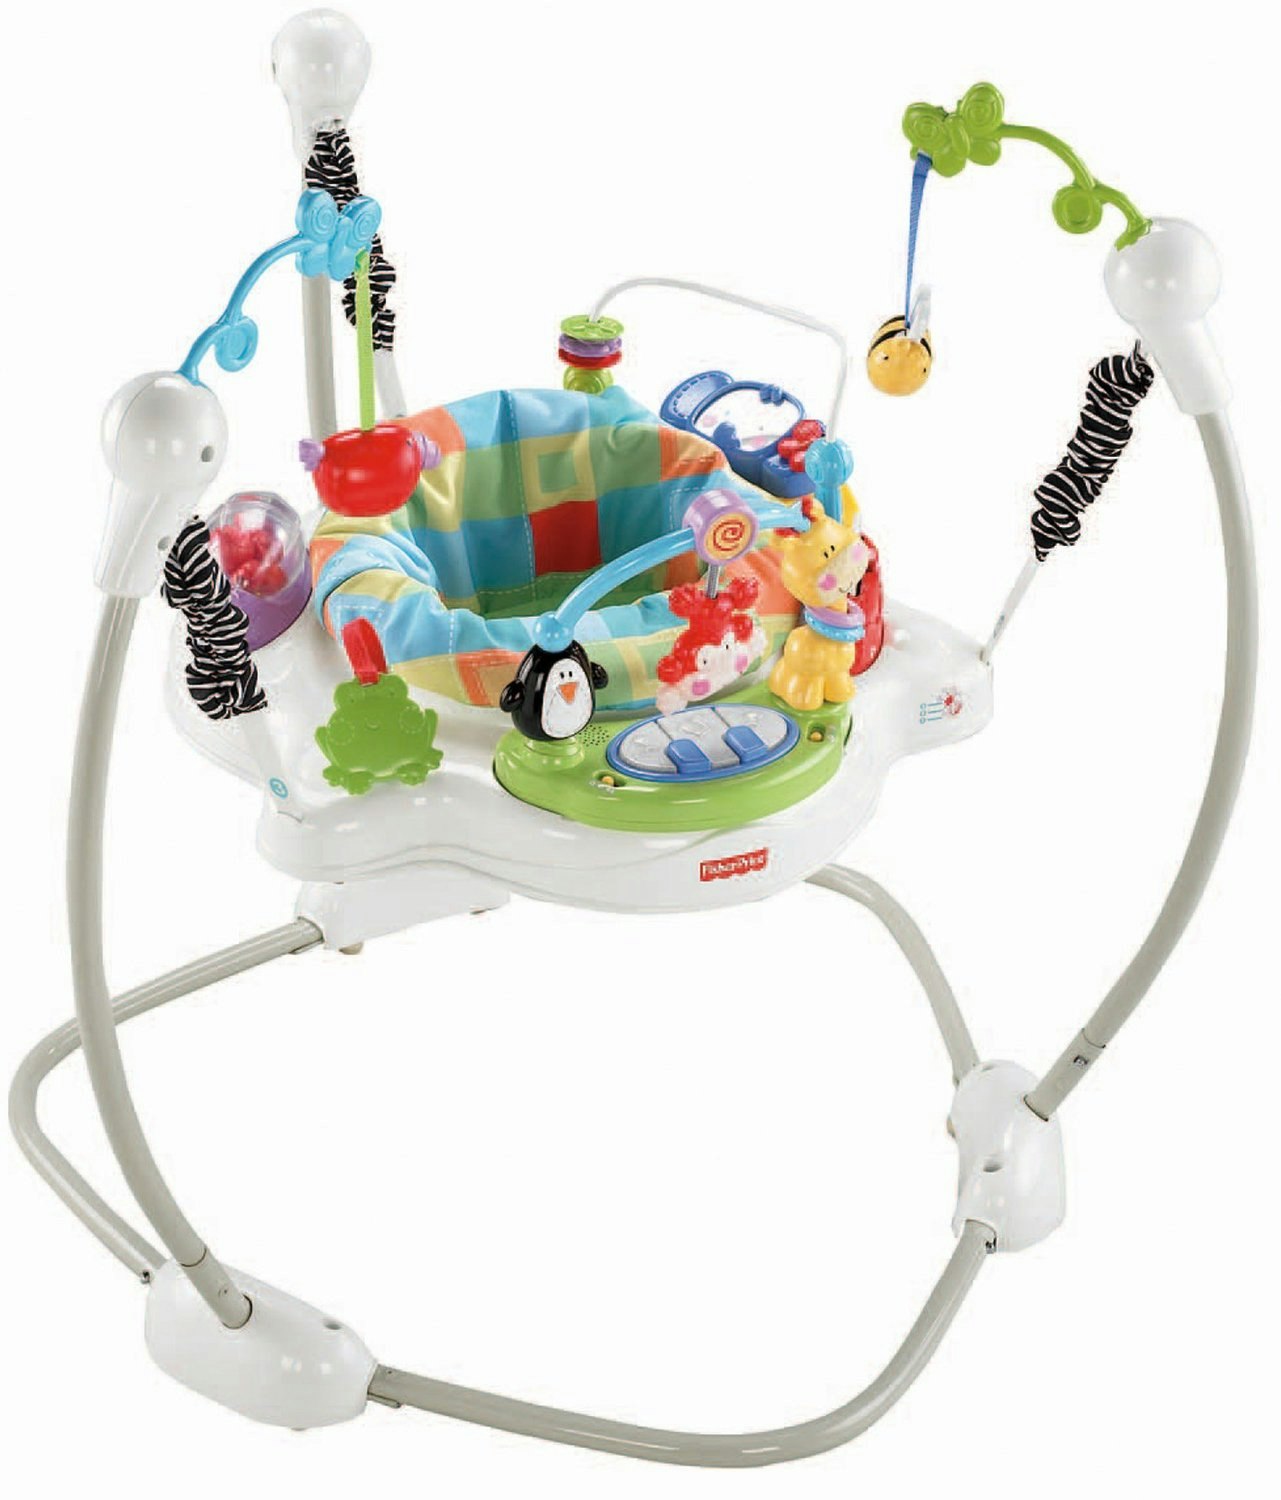 Fisher-Price Discover Grow Jumperoo review